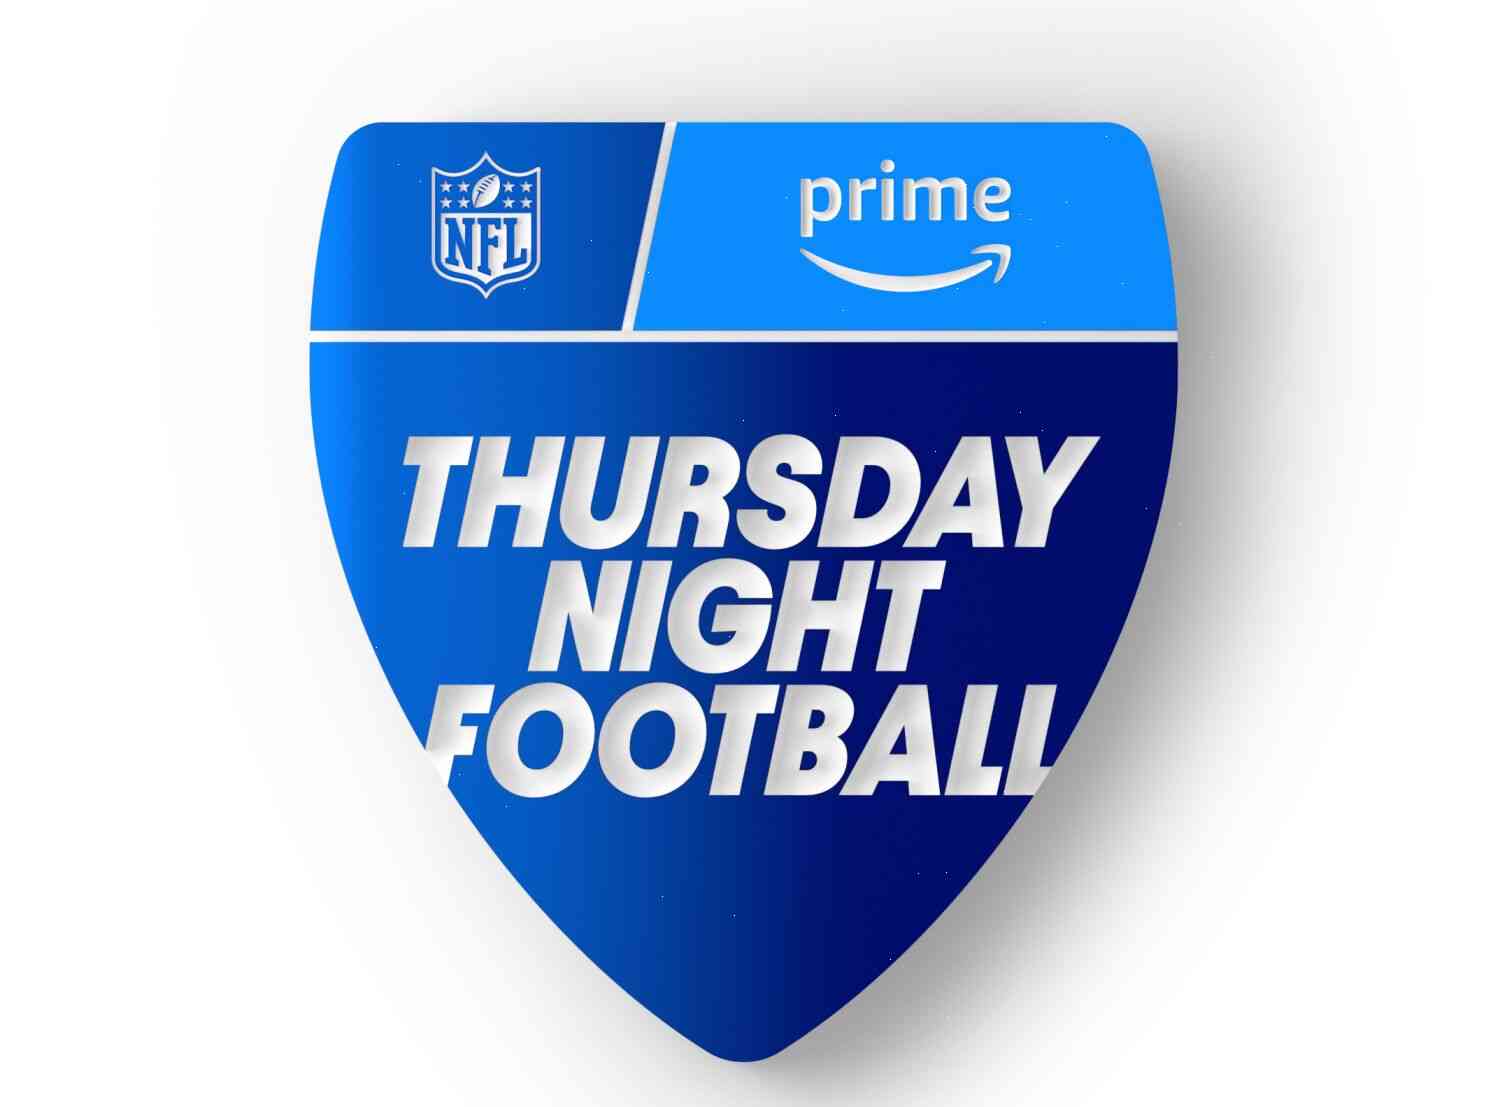 Amazon to stream NFL games for Prime Video customers